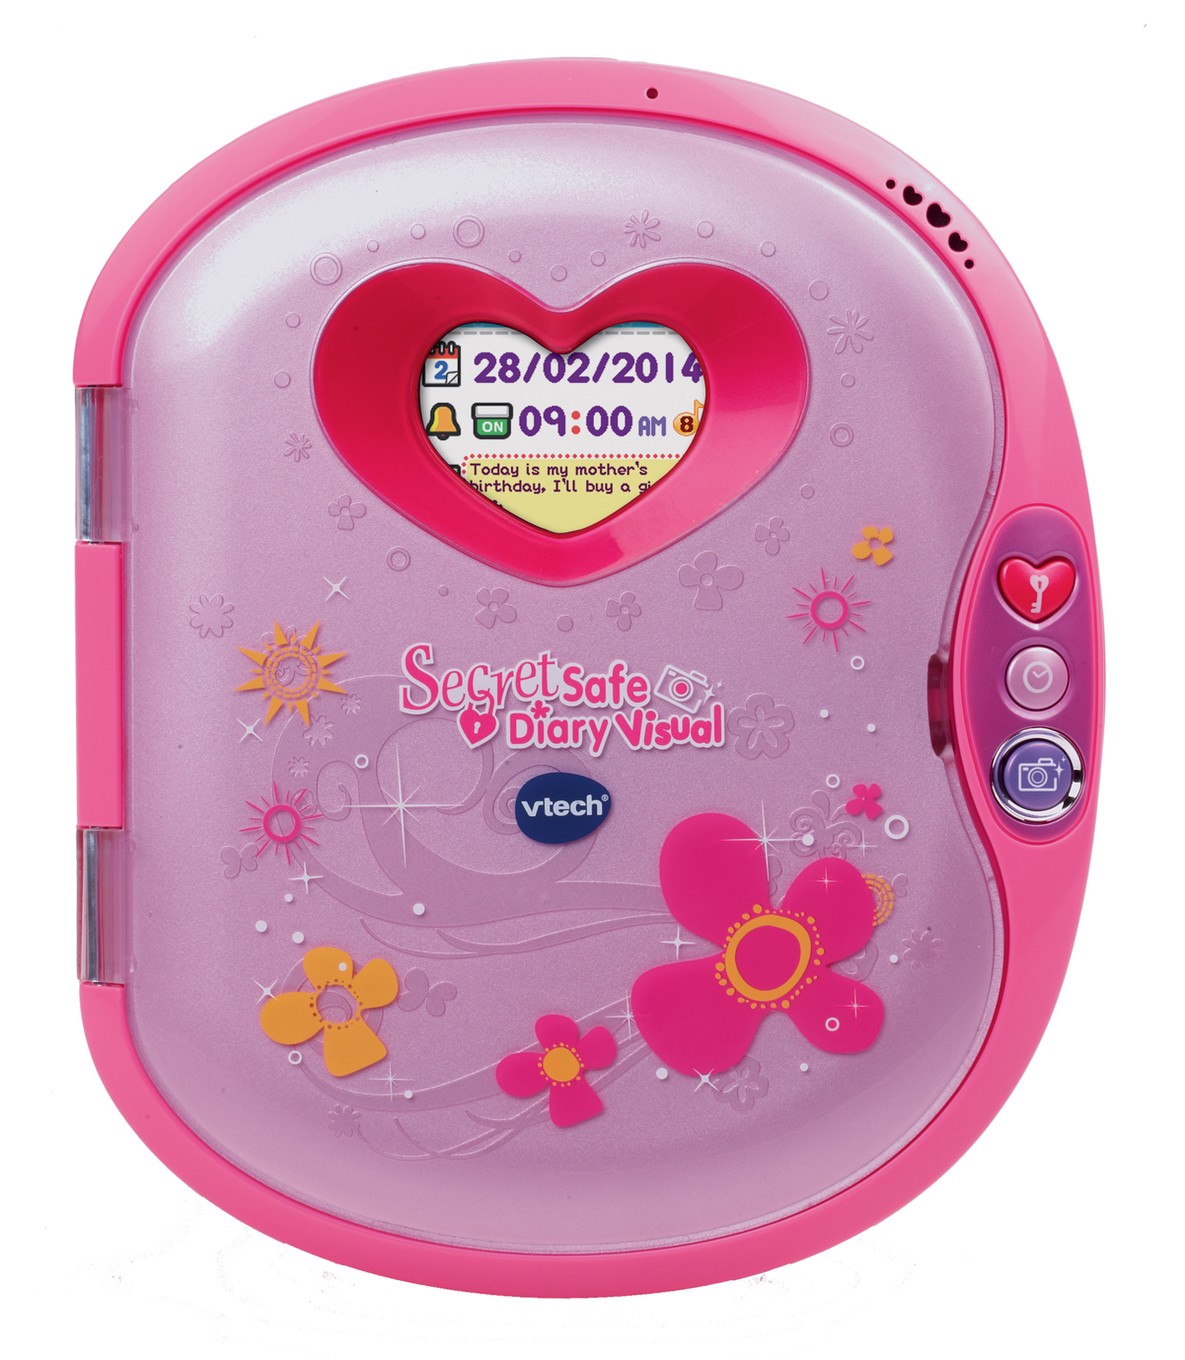 vTech Secret Safe Electronic Learning Diary Colour with Voice Recognition 